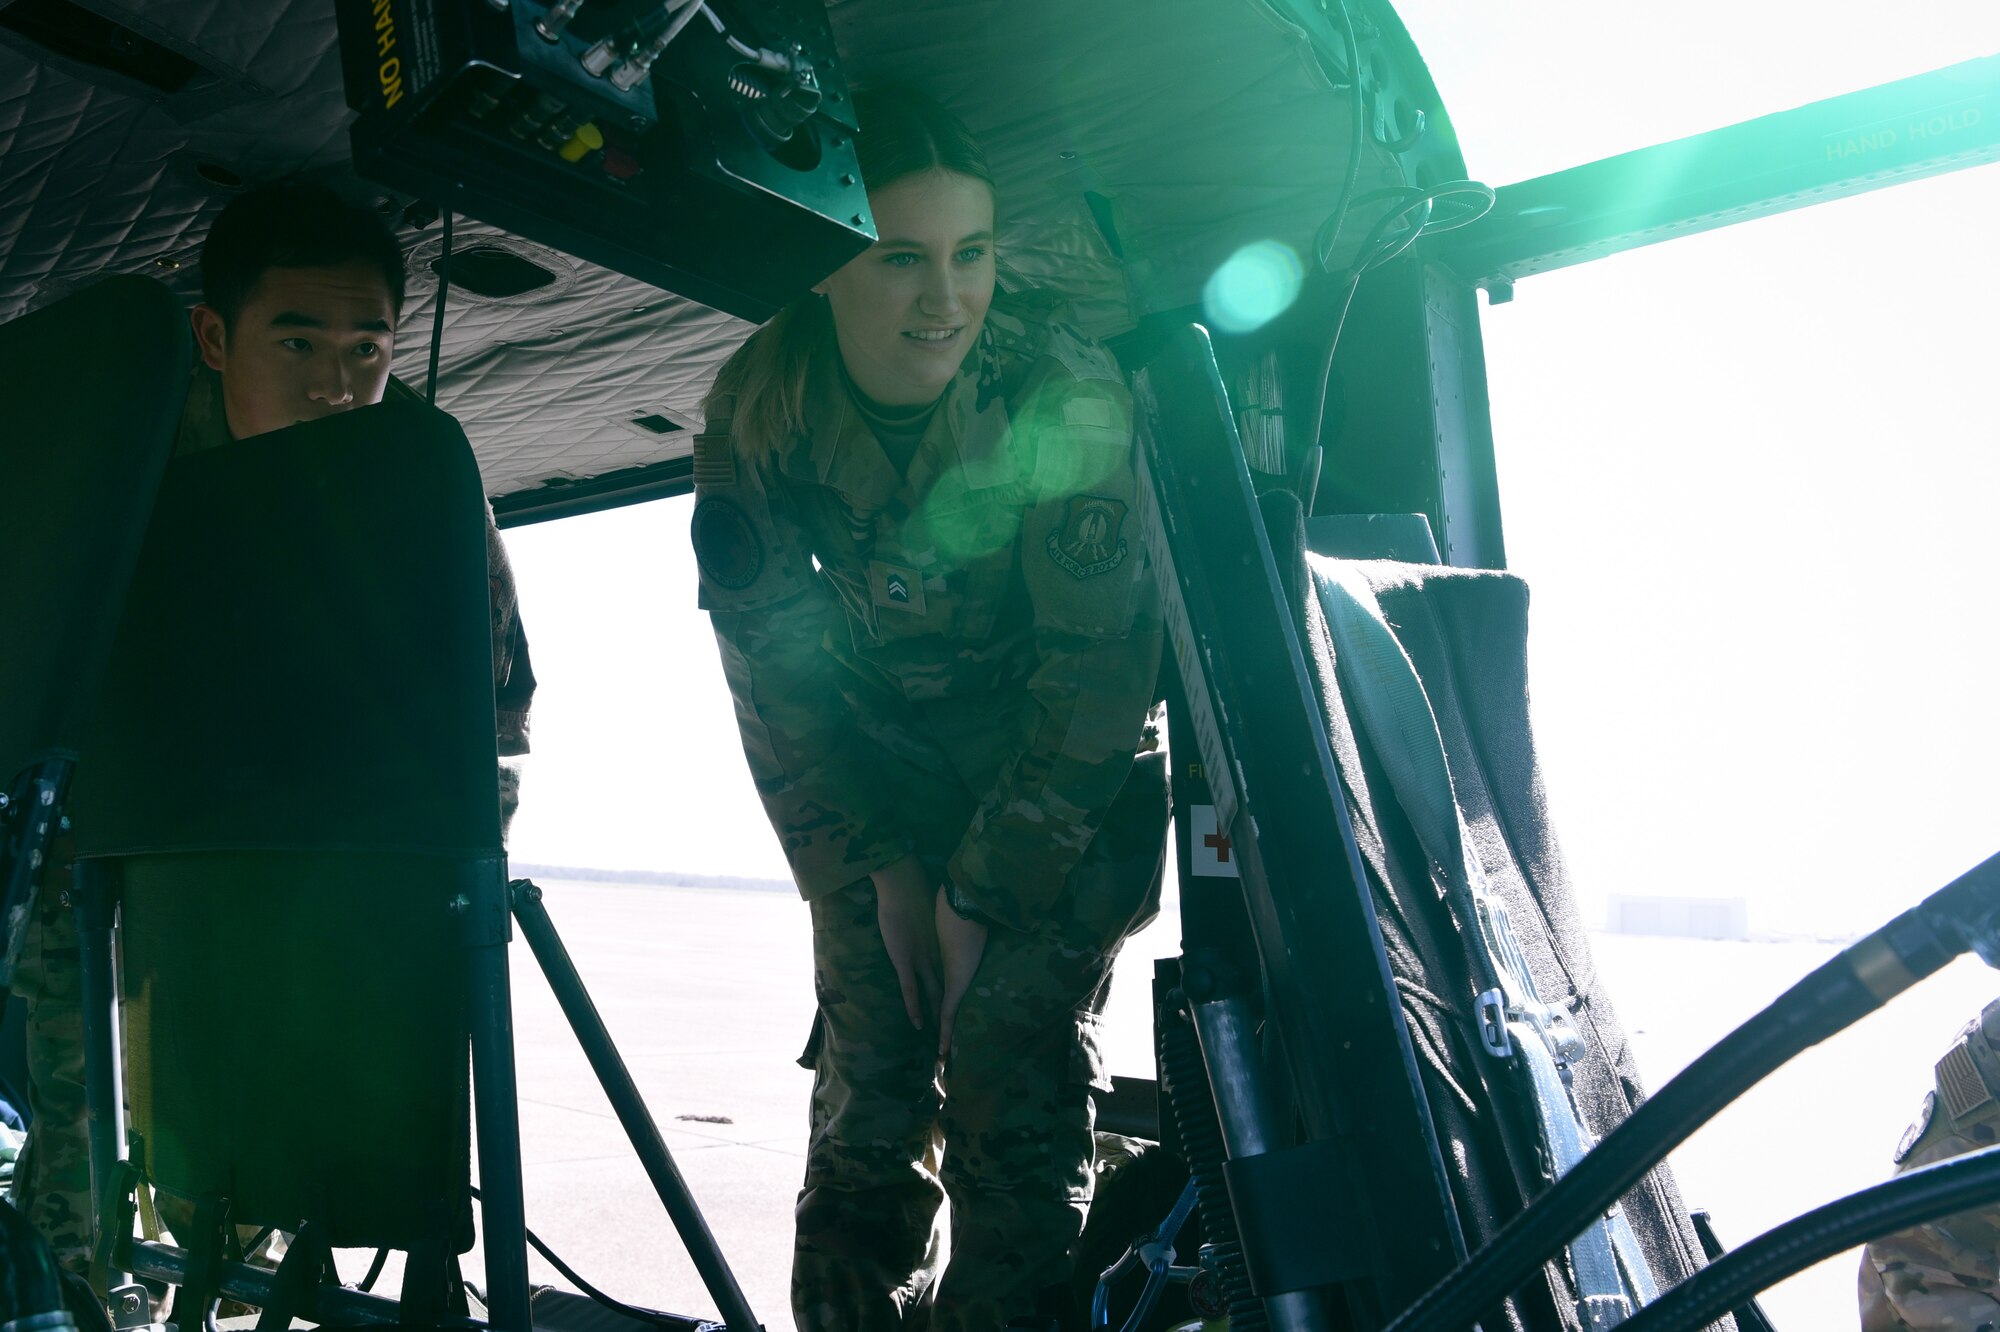 two ROTC cadets look in cockpit of helicopter